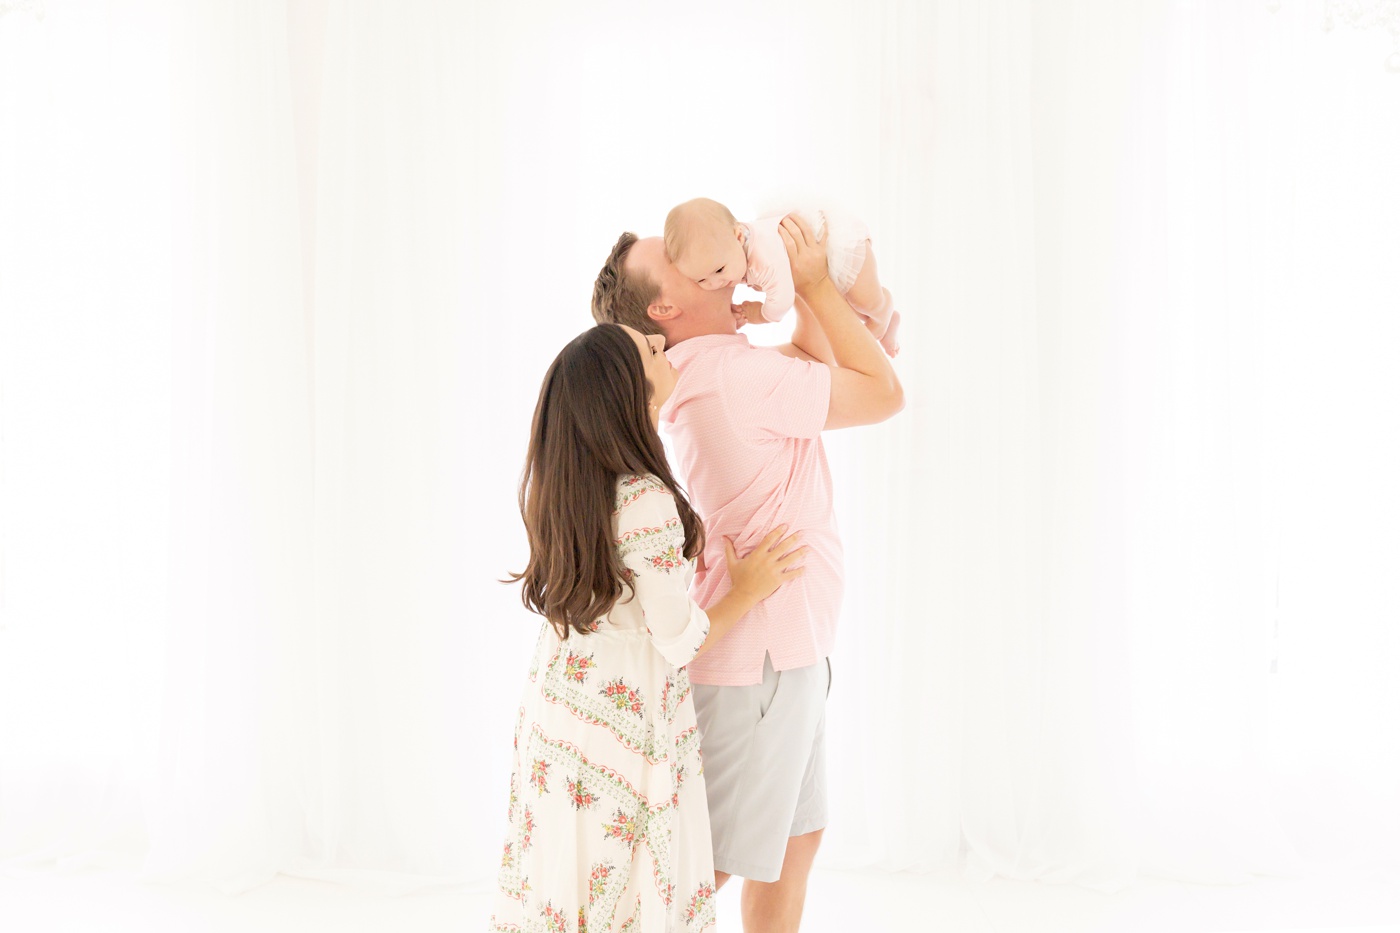 Mom, Dad and baby being photographed in a white photography studio